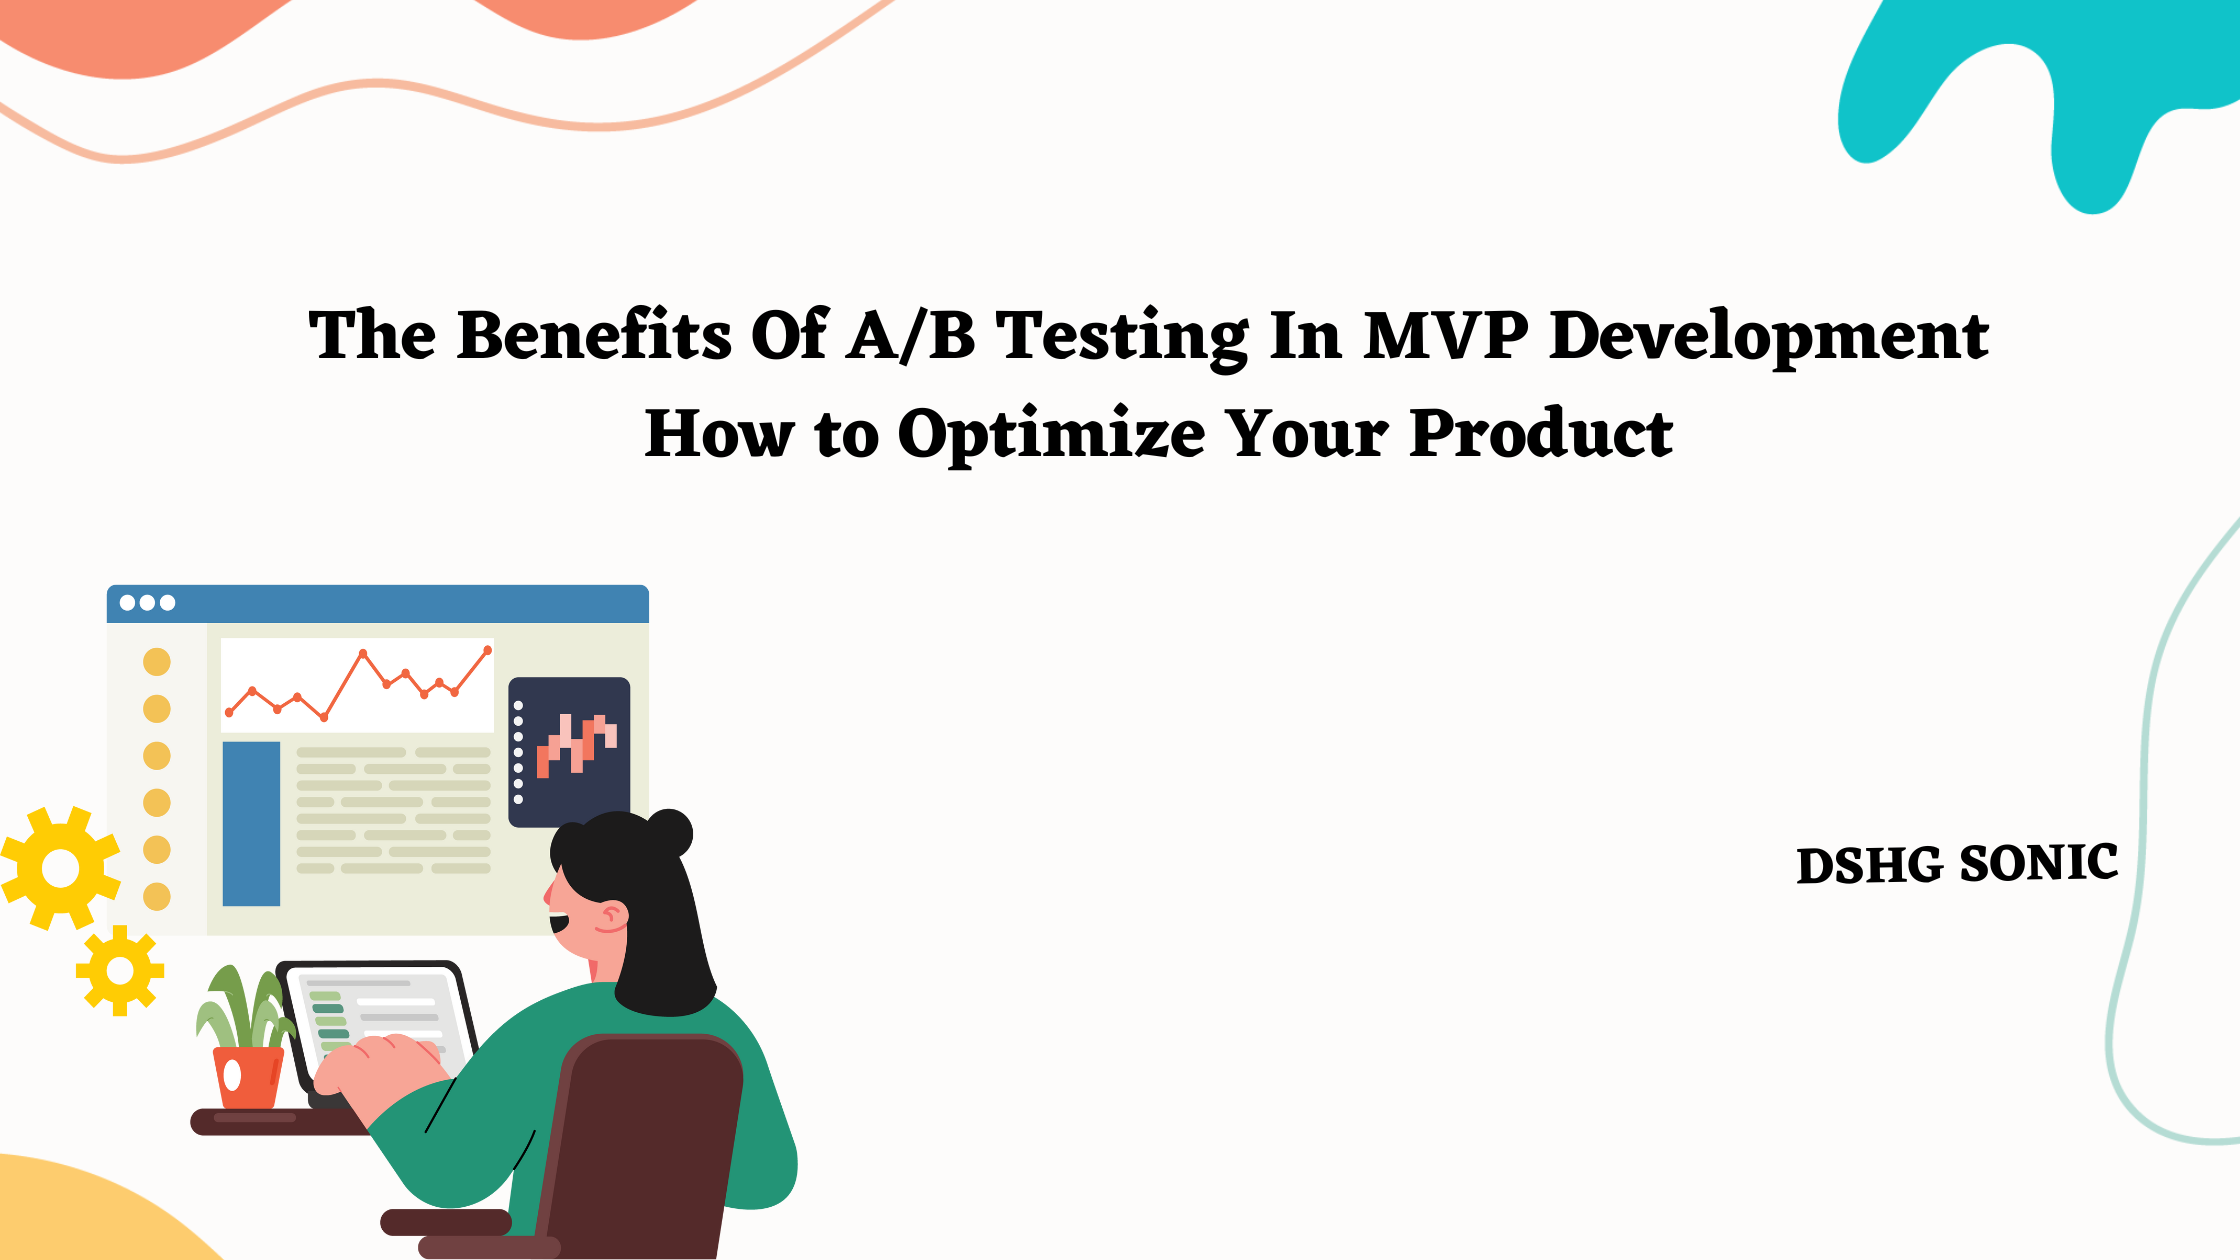 The Benefits Of A/B Testing In MVP Development: How To Optimize Your Product